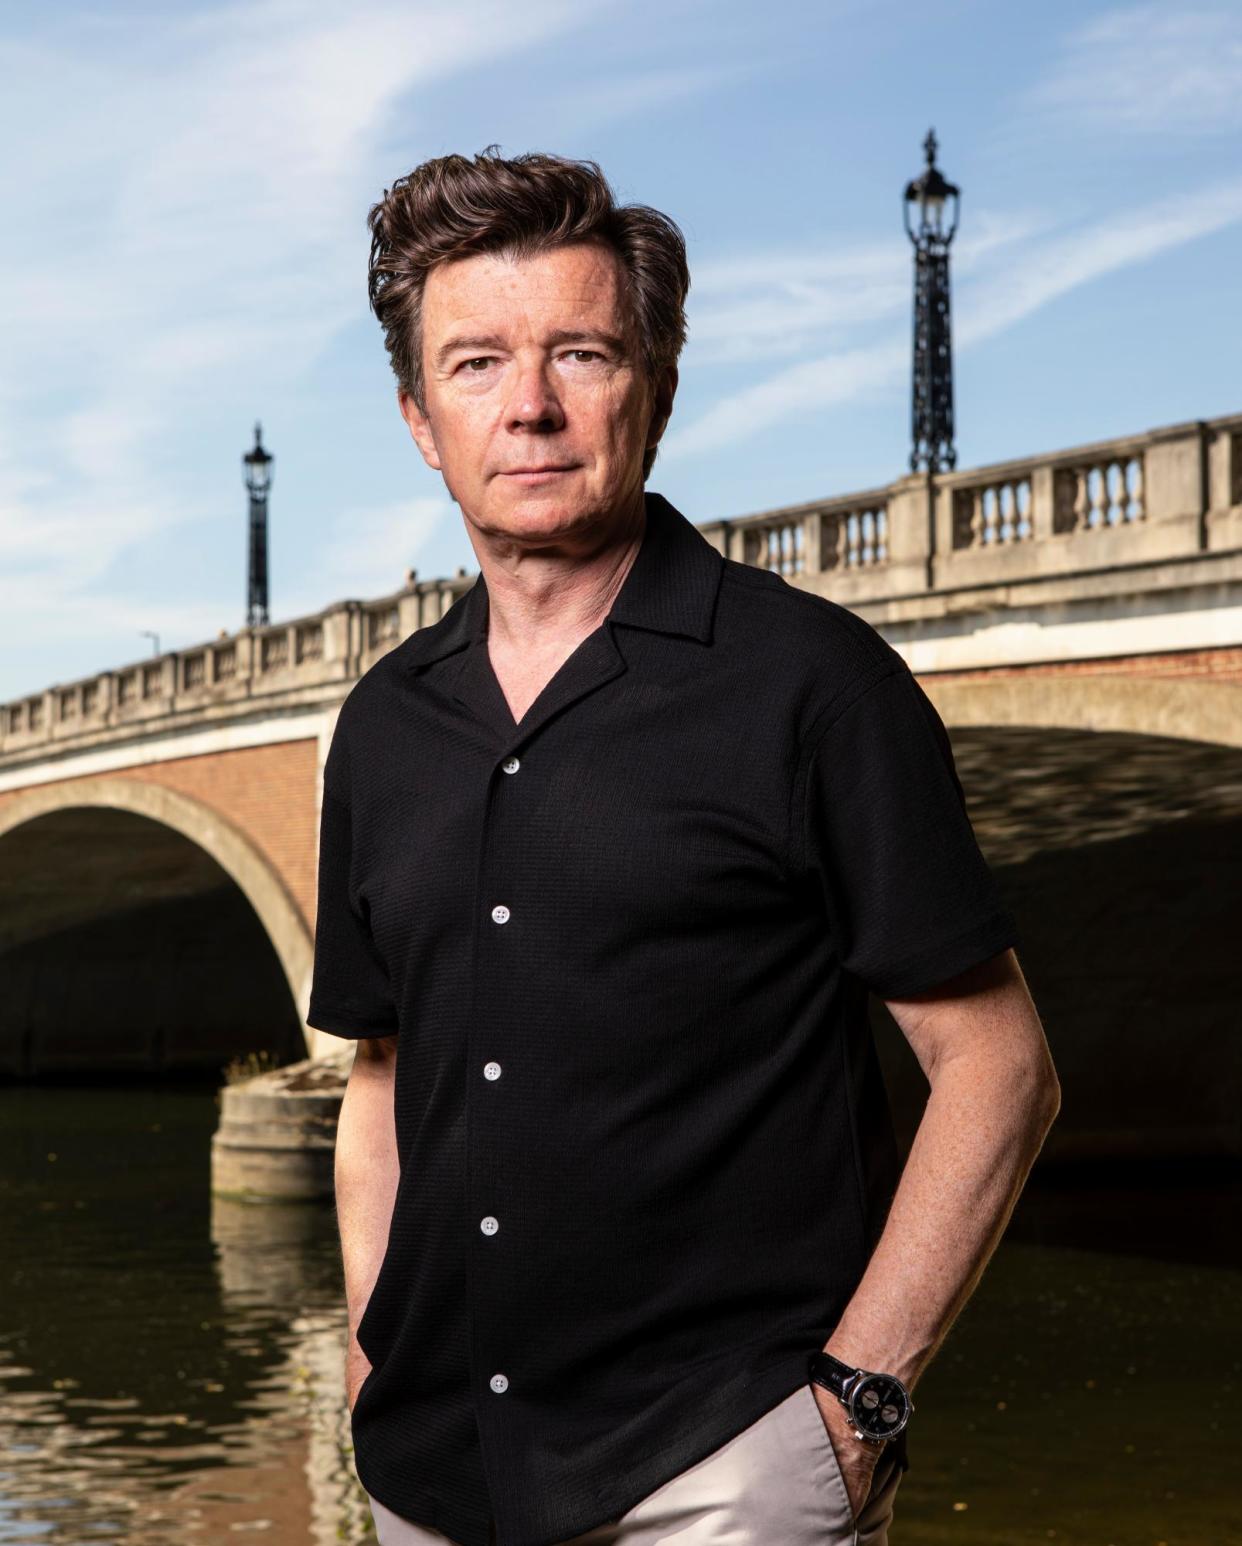 <span>‘Anything can happen at any time’: Rick Astley by the Thames in Hampton, west London.</span><span>Photograph: Antonio Olmos/The Observer</span>